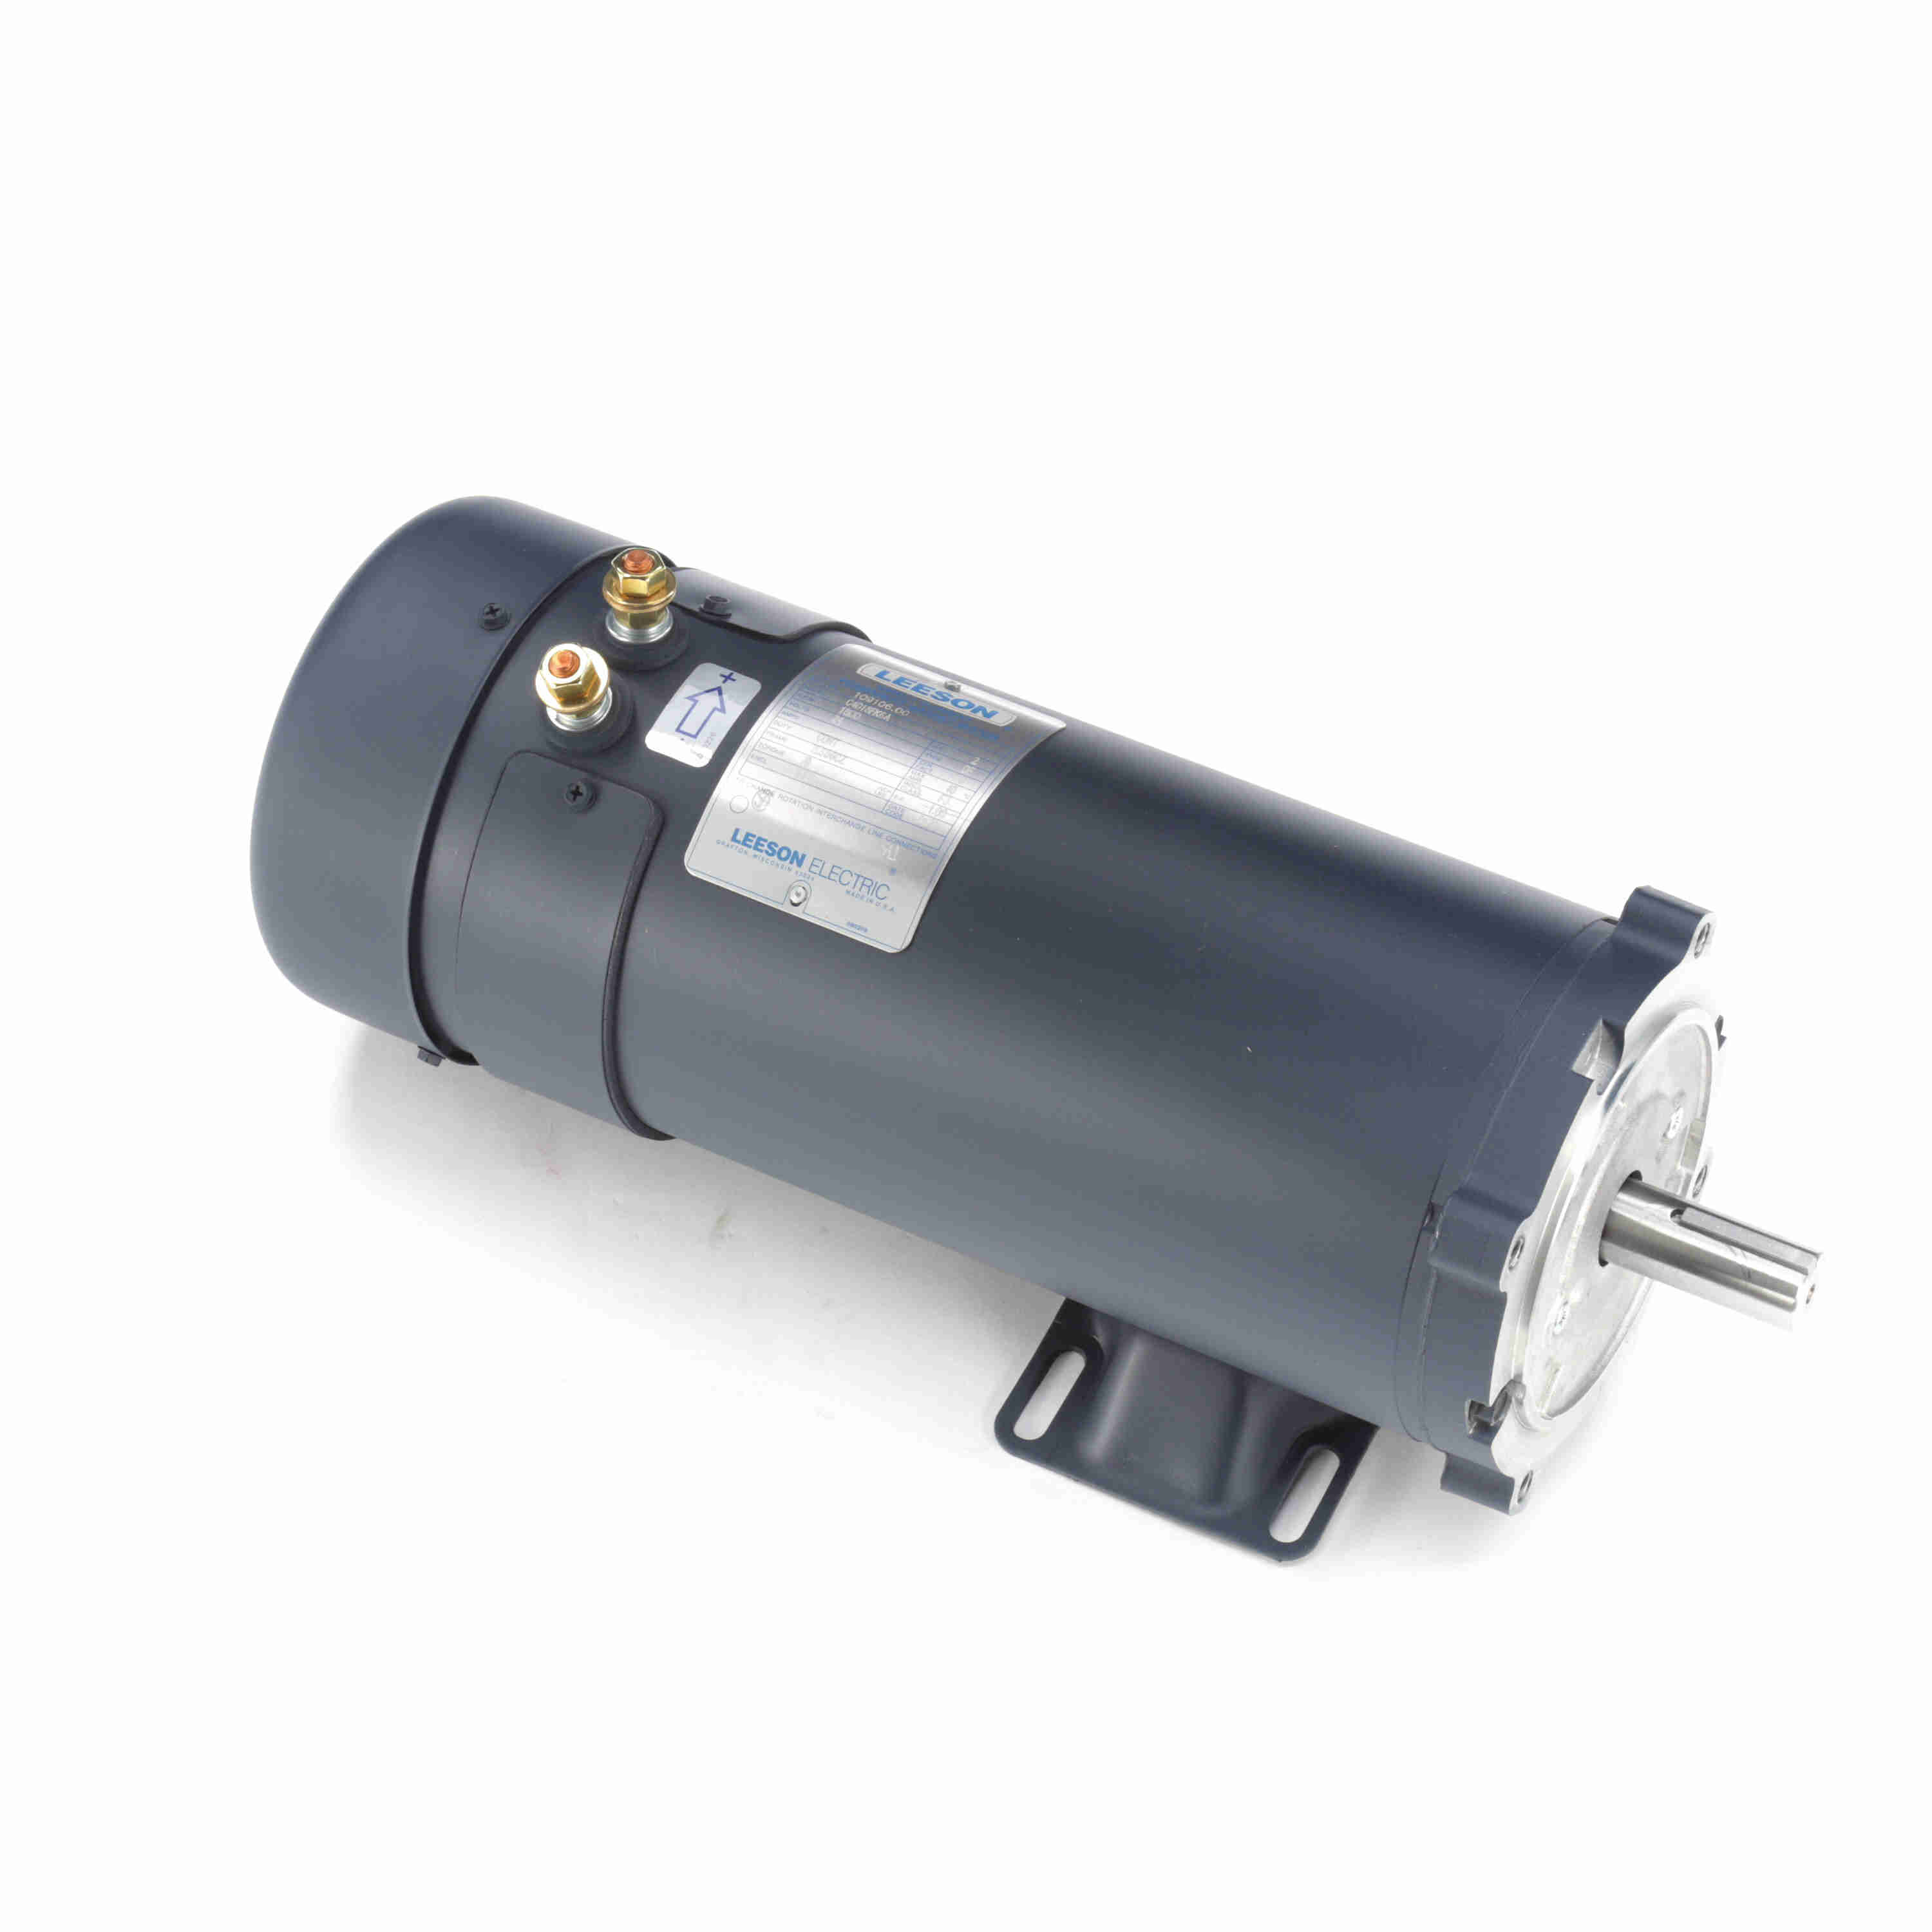 109106.00 Leeson 2HP Low Voltage DC Electric Motor, 1800RPM 4